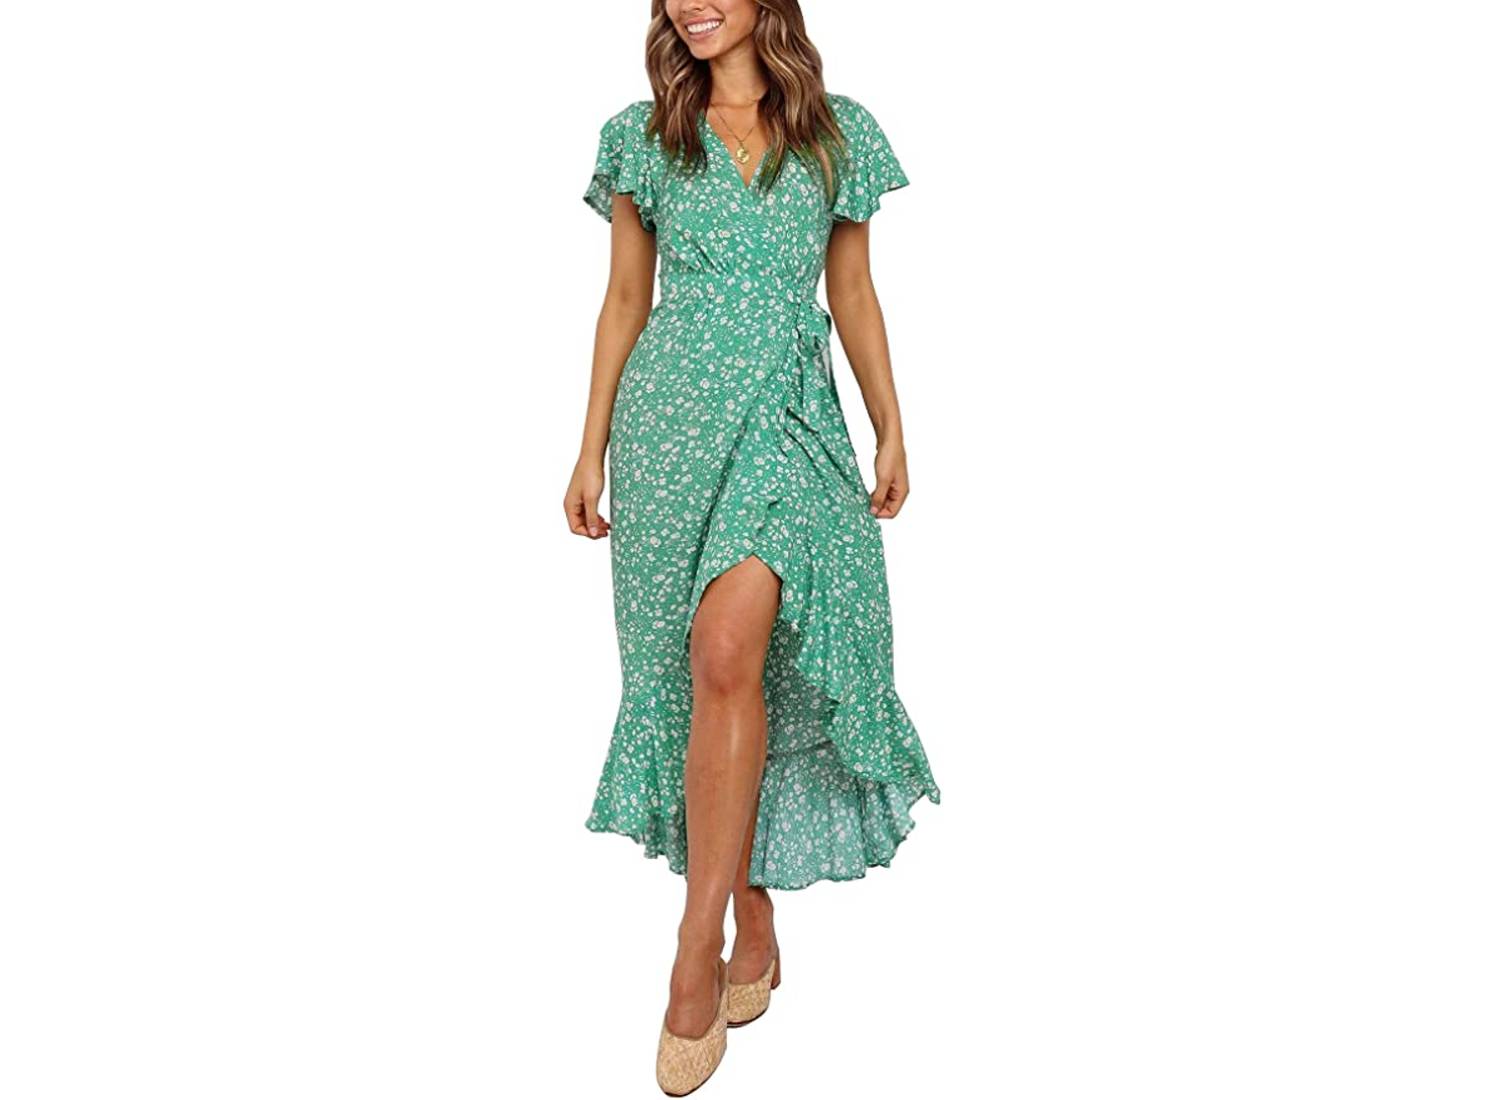 woman-dressed-green-floral-mussel-dress